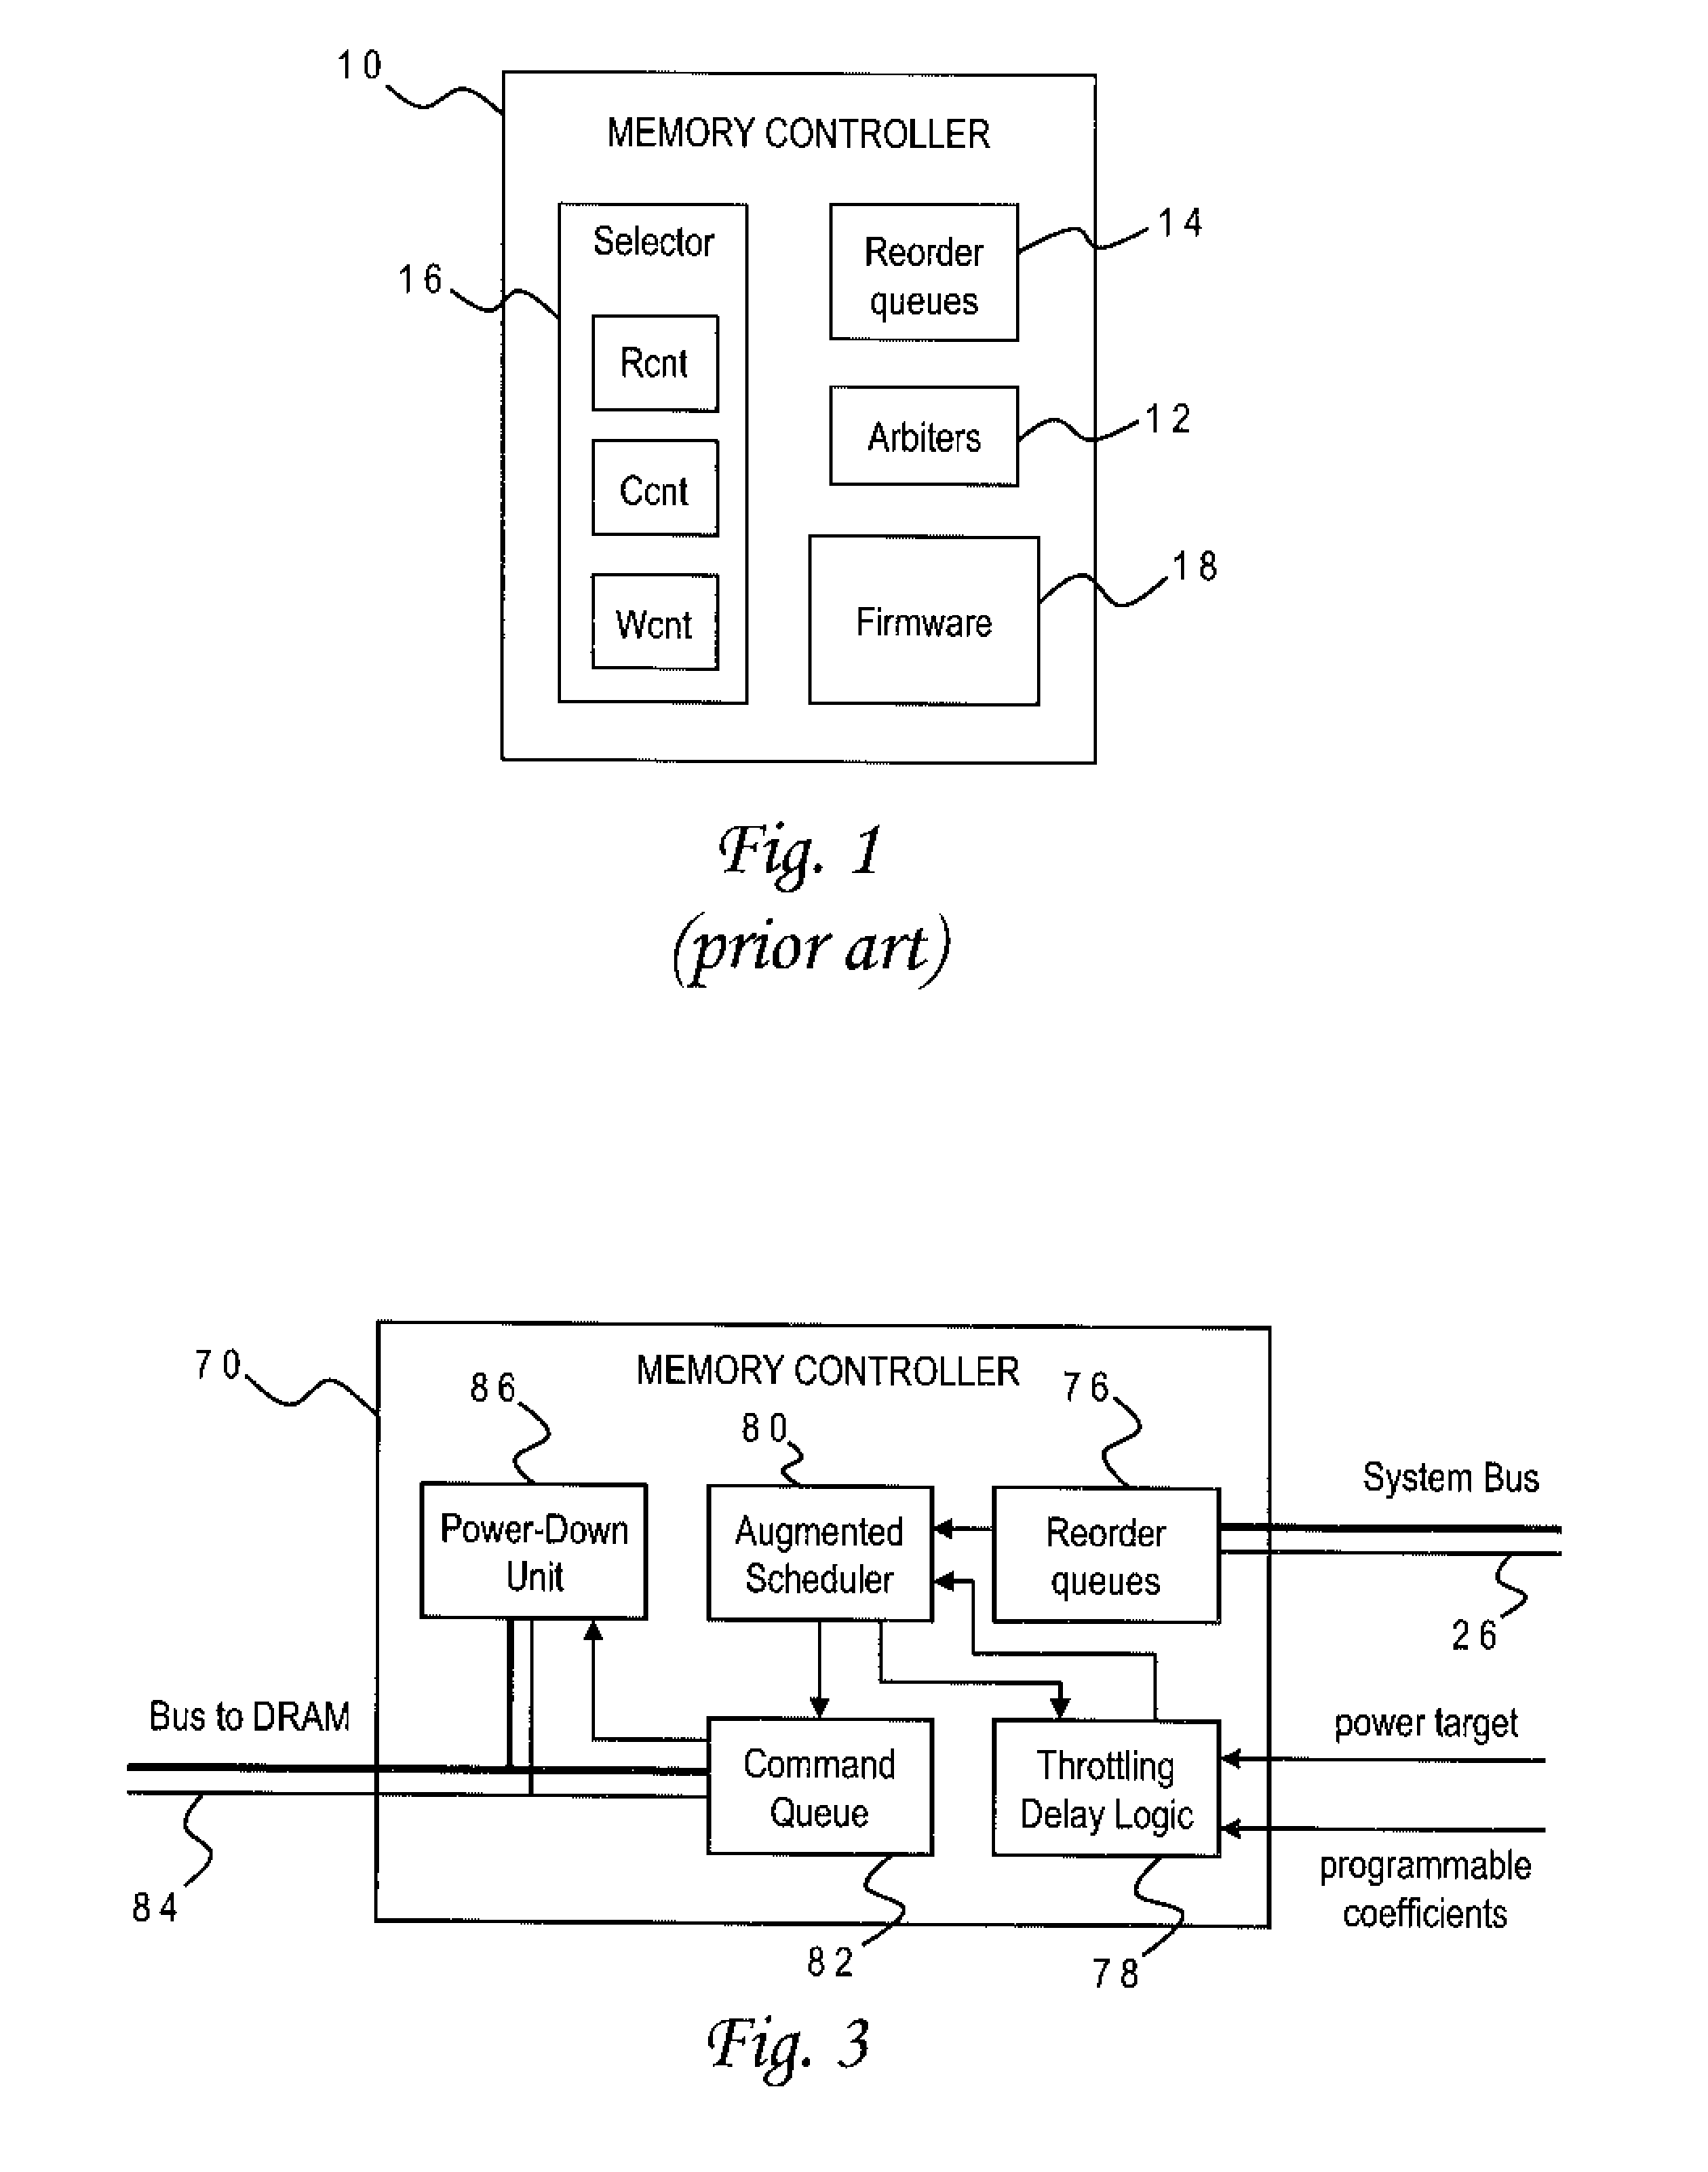 Memory Controller with Programmable Regression Model for Power Control